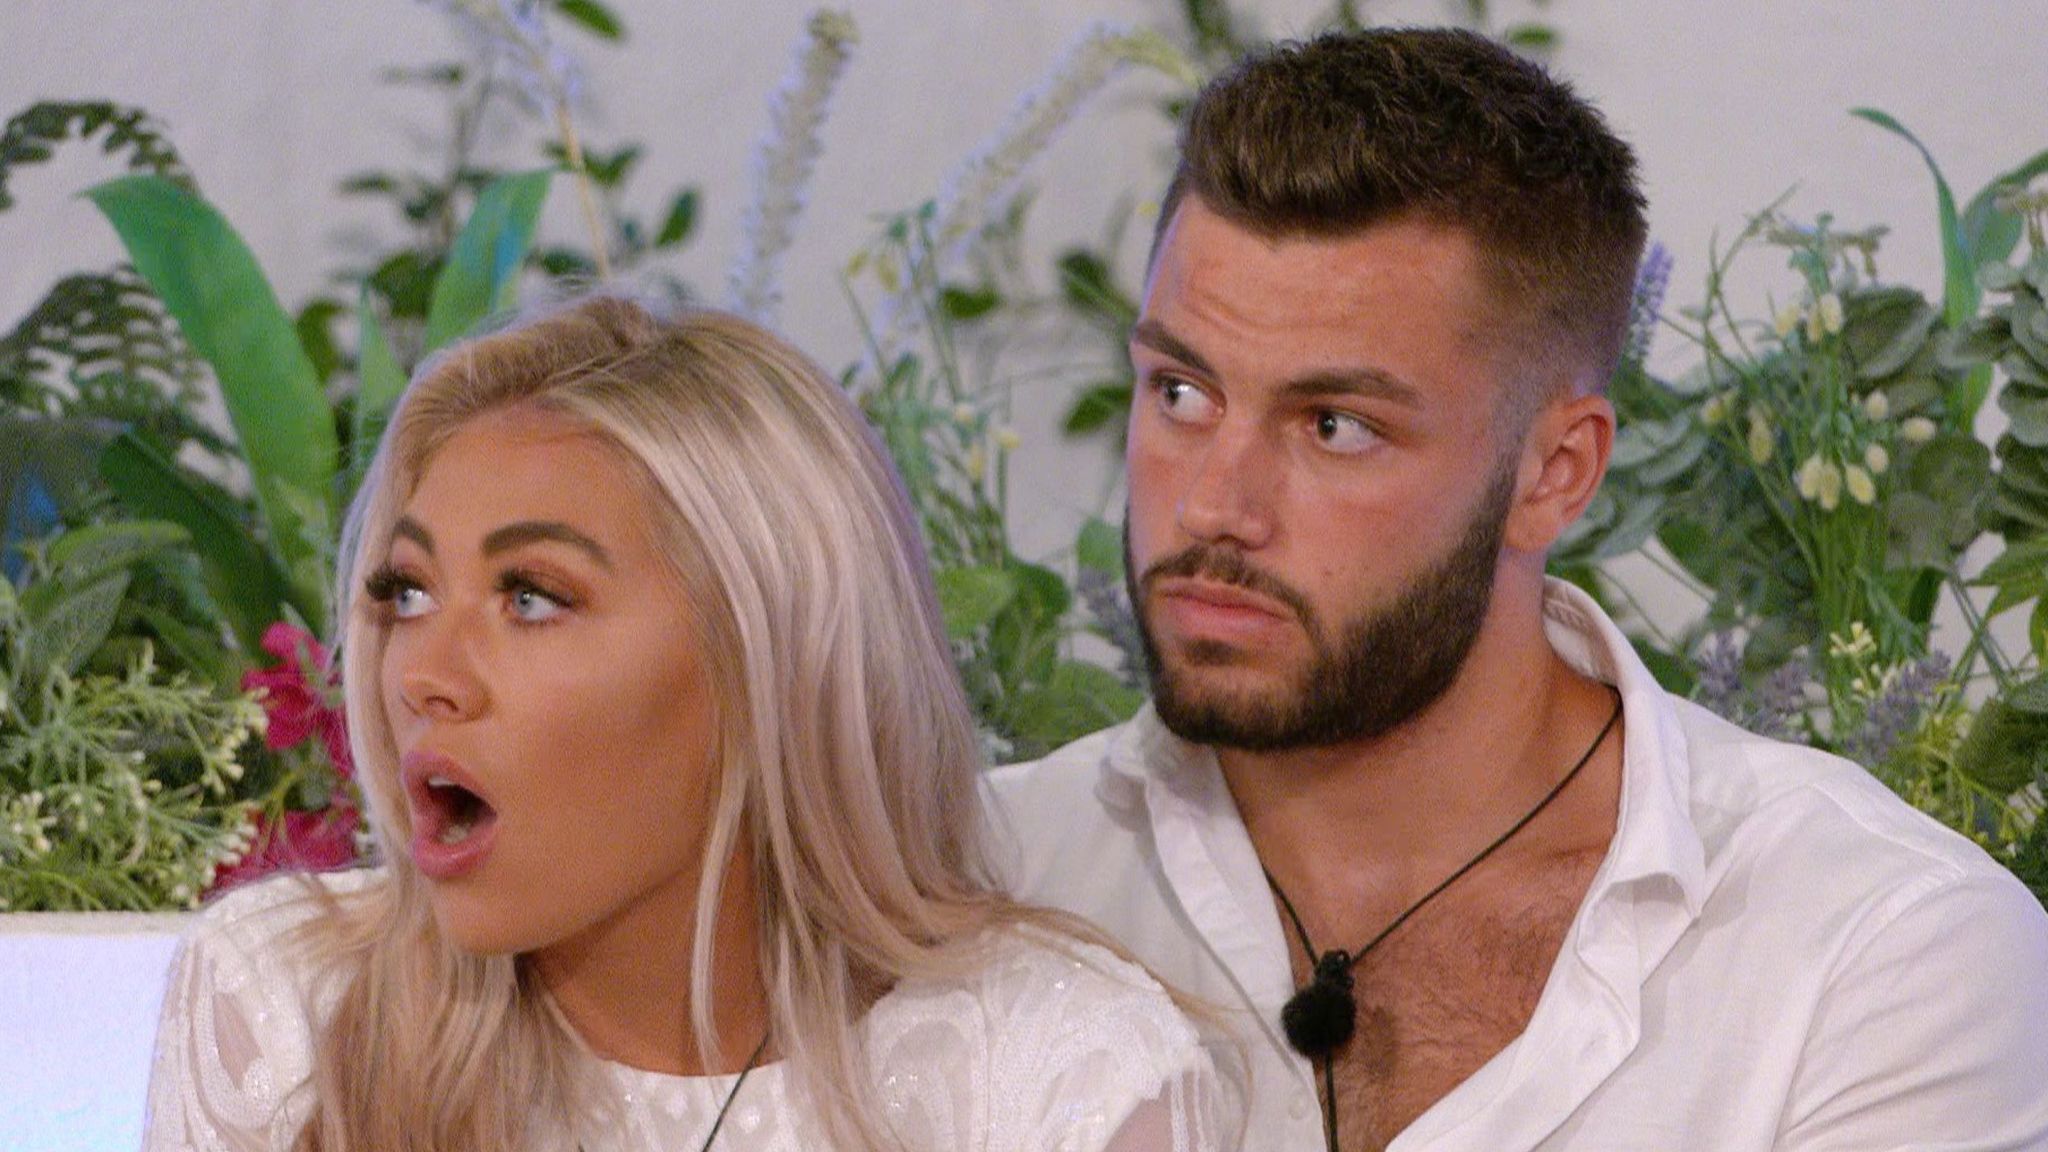 Love Island confirmed for summer 2021 return after COVID19